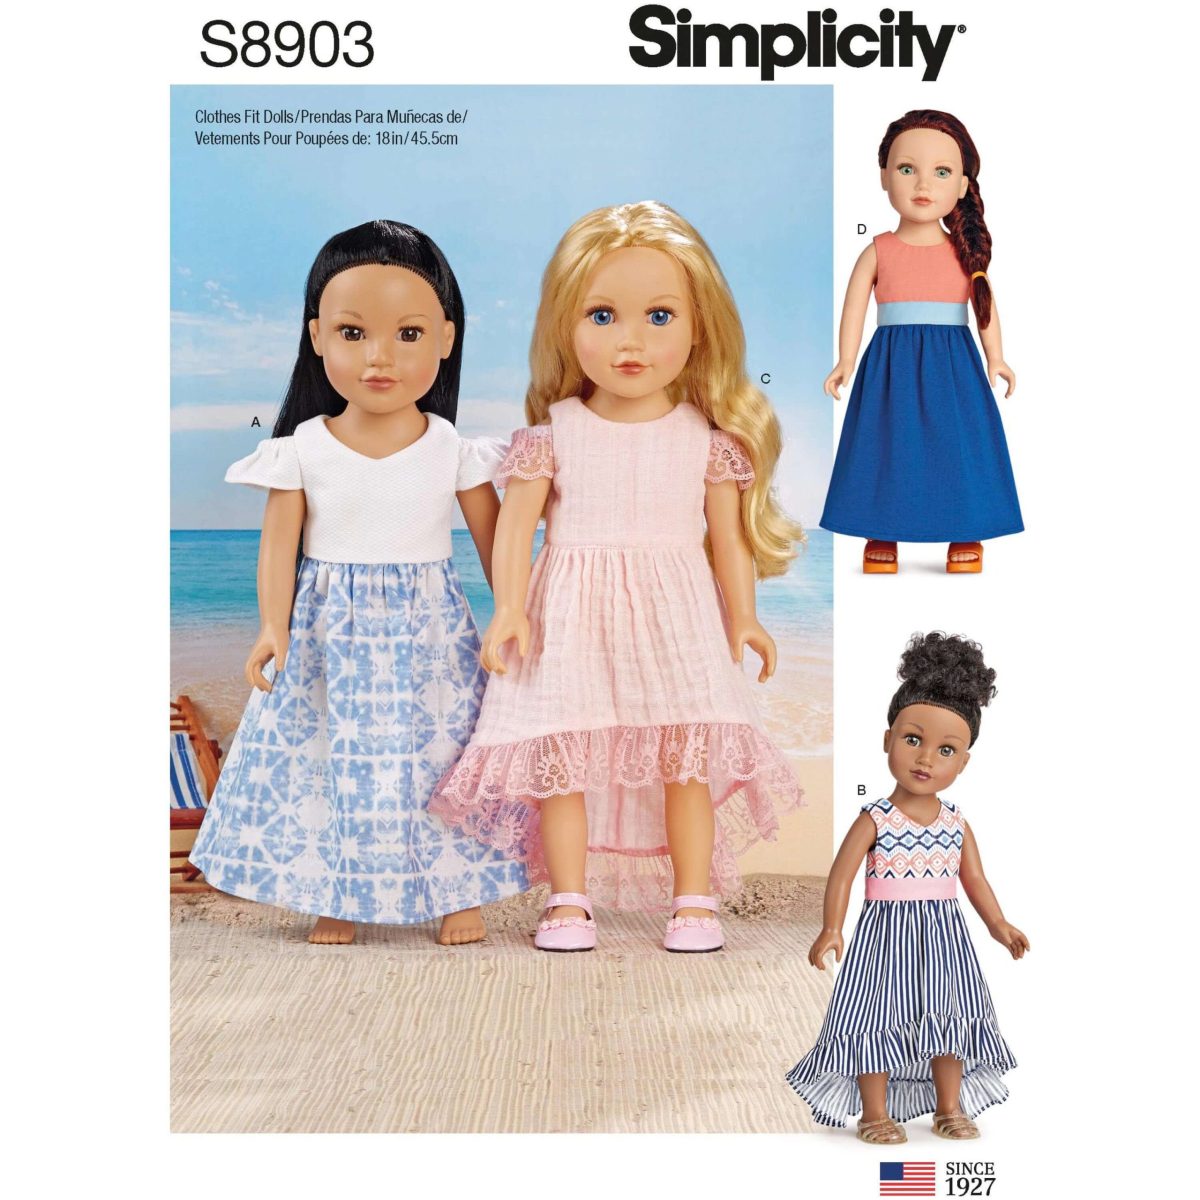 Simplicity Sewing Pattern S8903 18" Doll Clothes